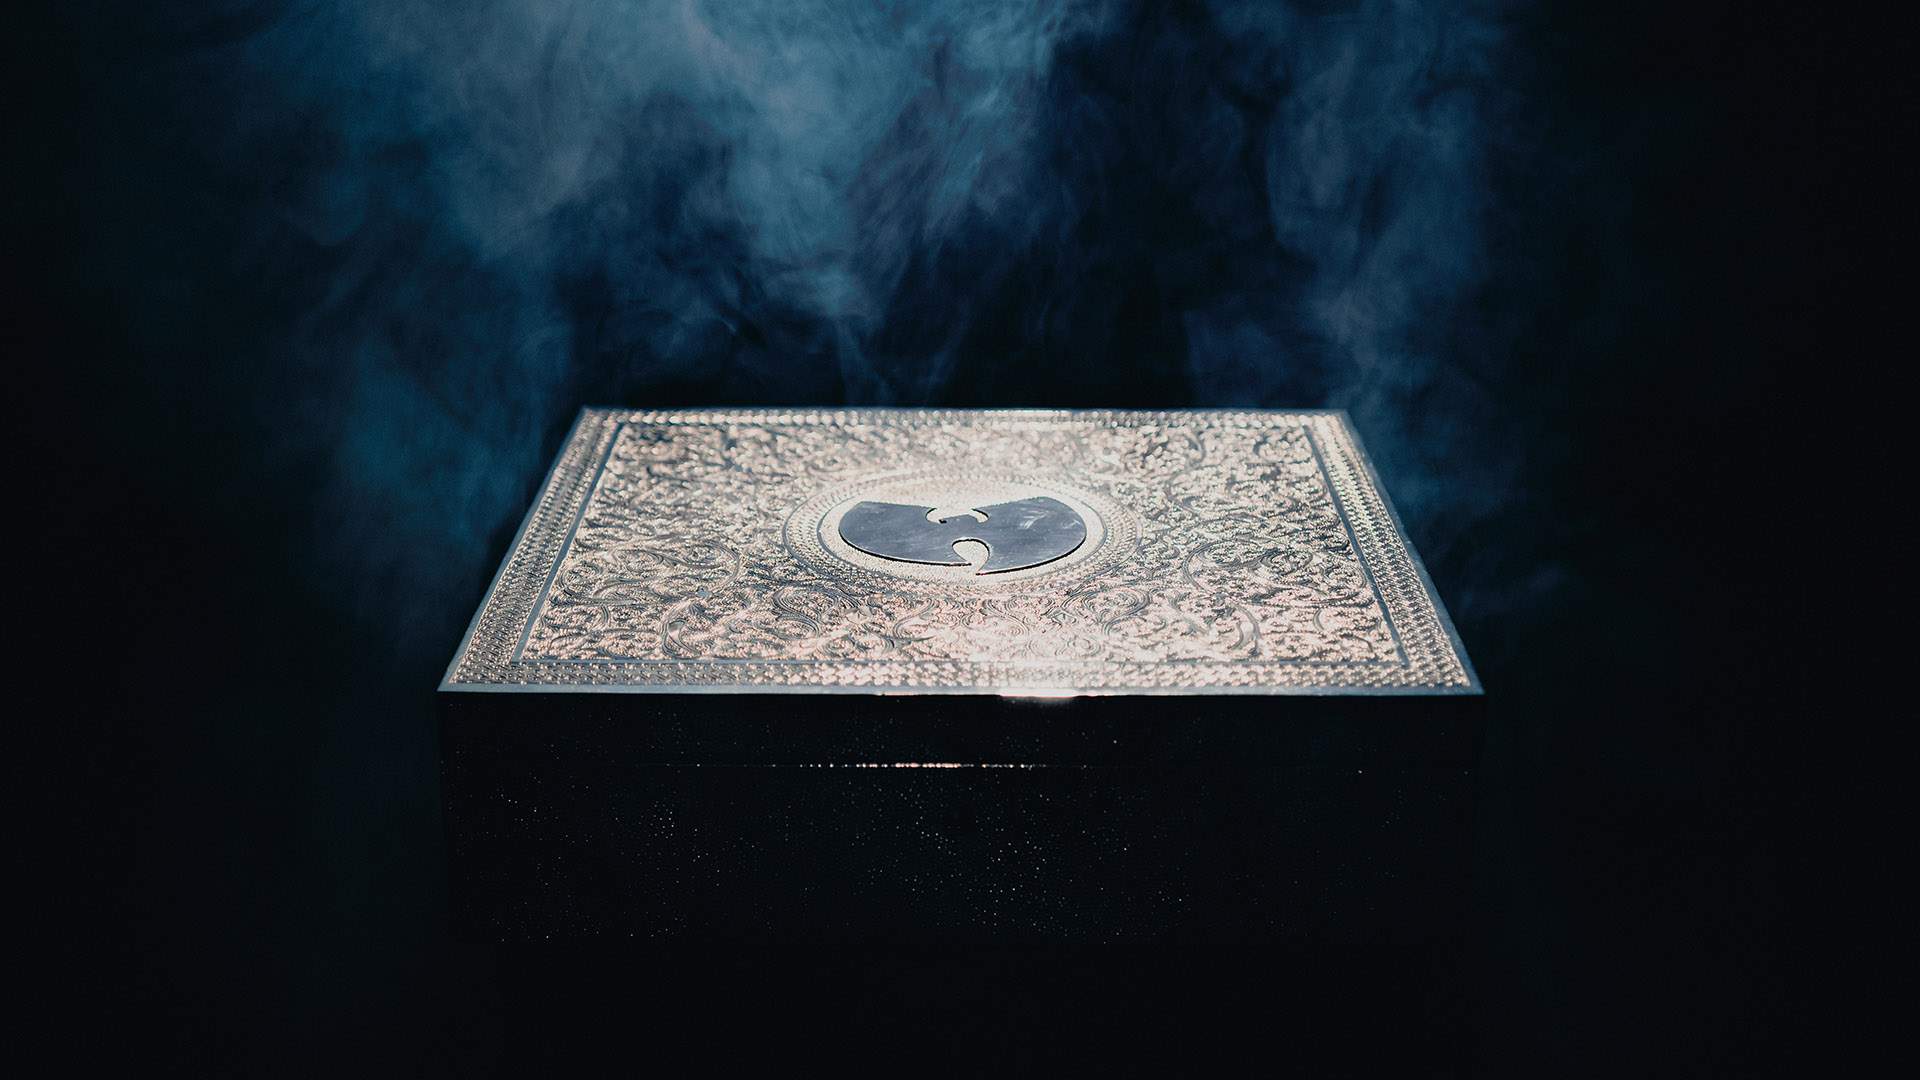 The Sole Copy of Wu-Tang Clan's 'Once Upon a Time in Shaolin' Is Heading to Mona for Ten Days in June